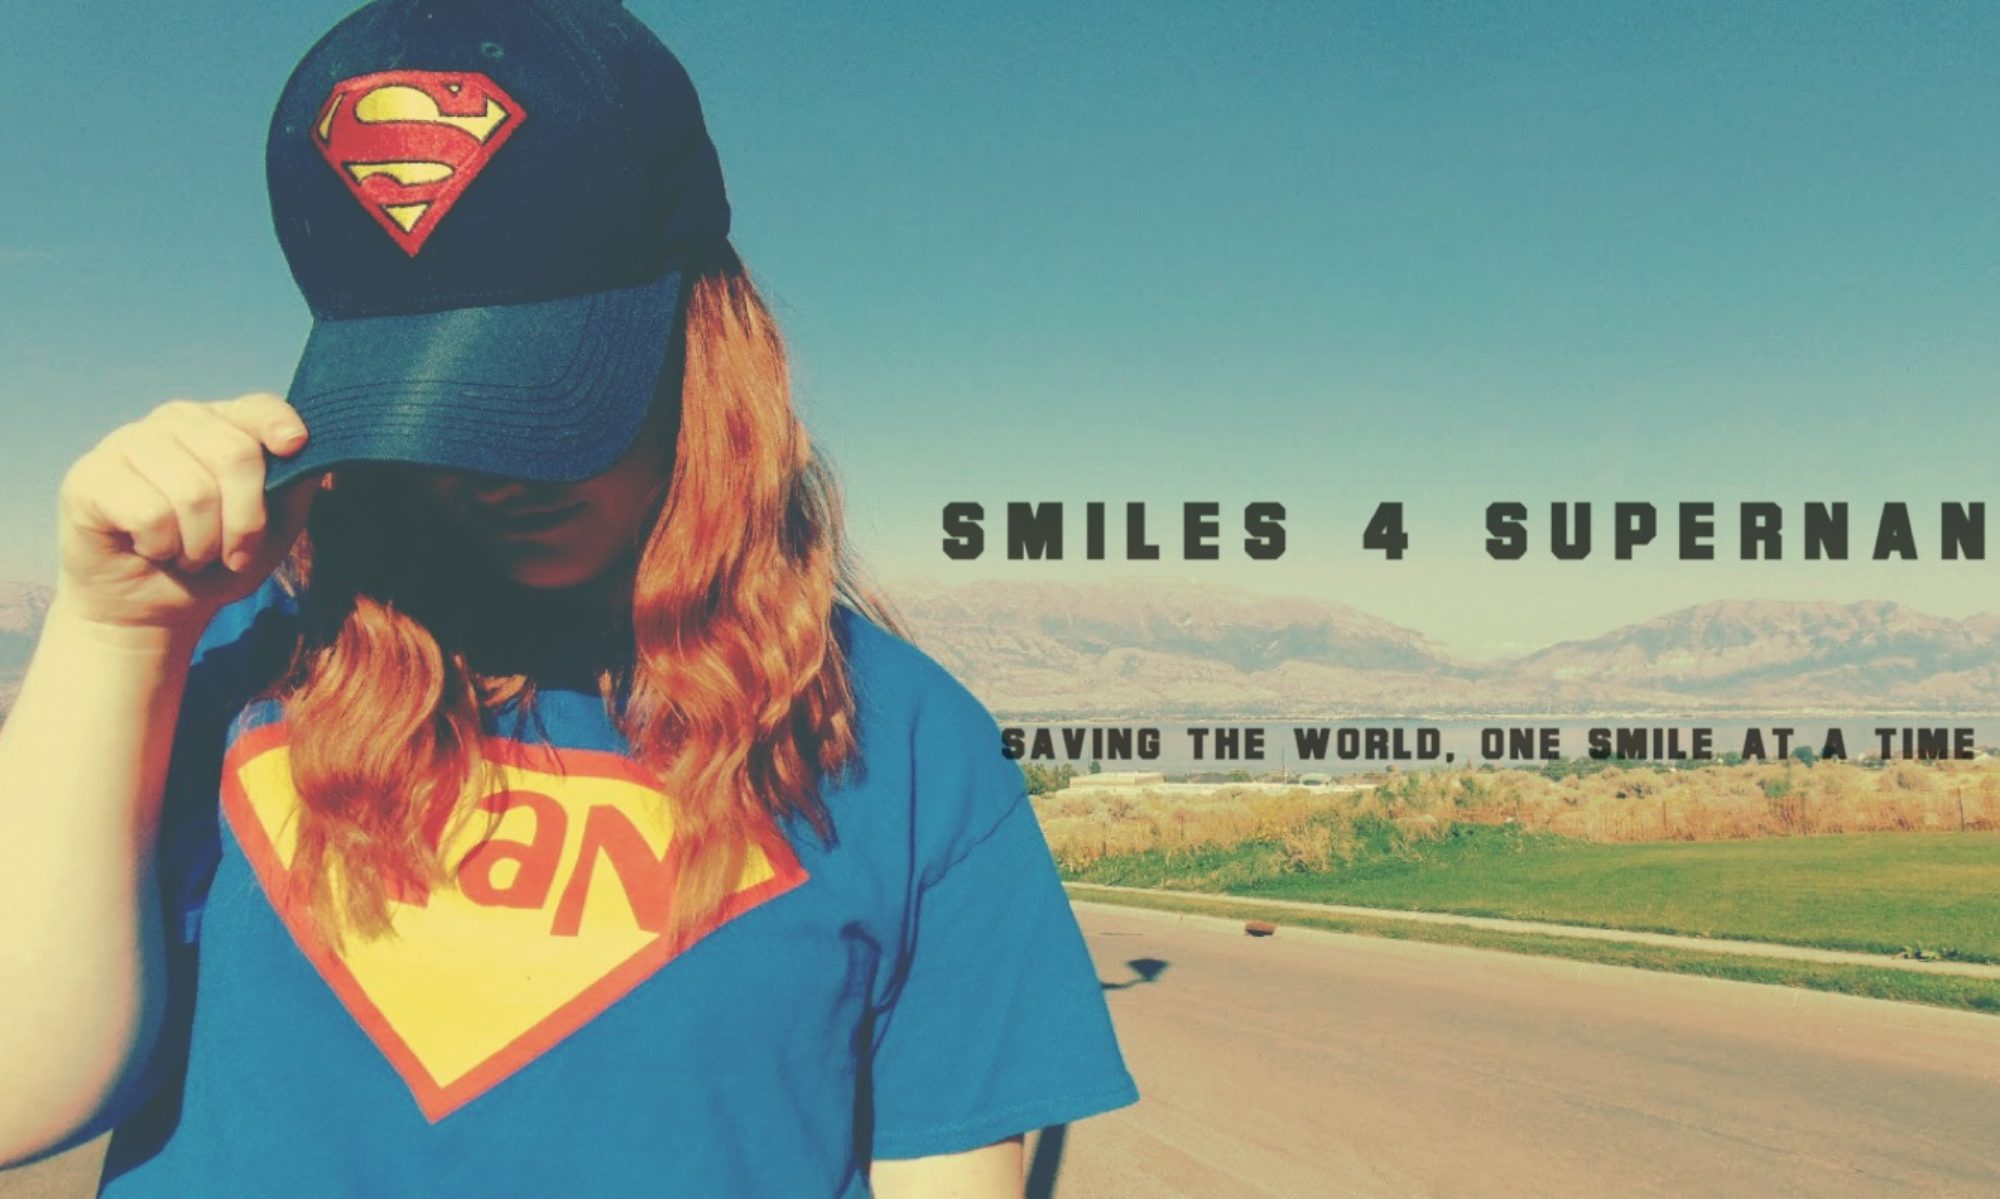 Smiles 4 SuperNan - Saving the World One Smile at a Time